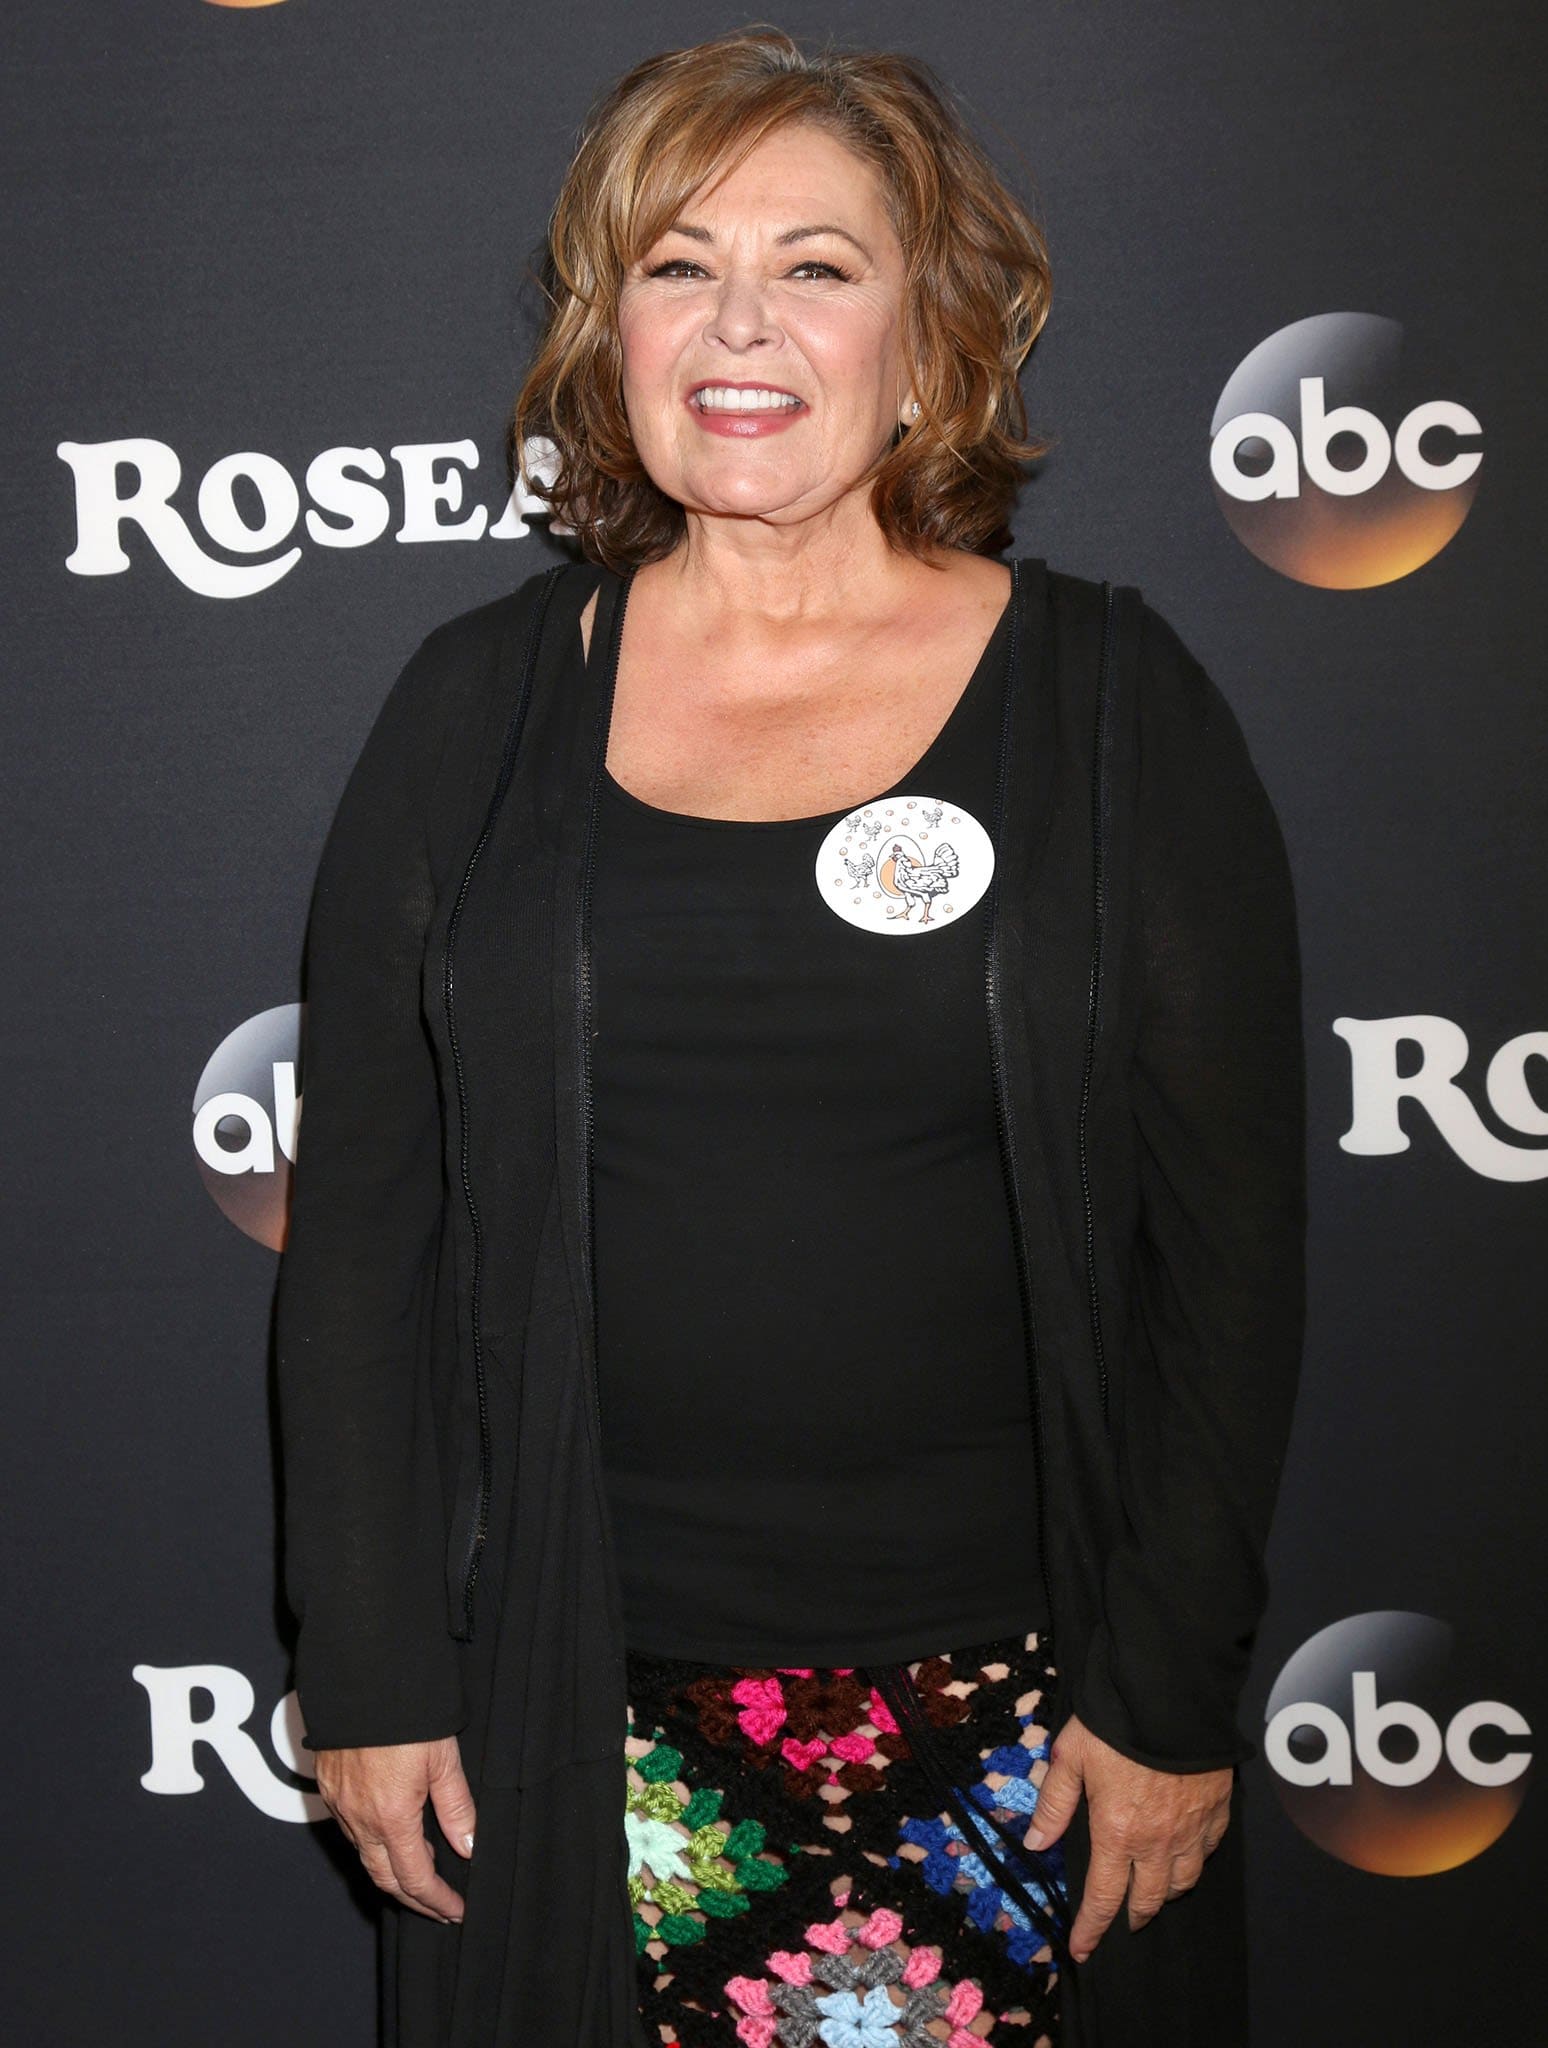 Roseanne Barr began her career in stand-up comedy before gaining acclaim in the television sitcom Roseanne, for which she won an Emmy and a Golden Globe Award